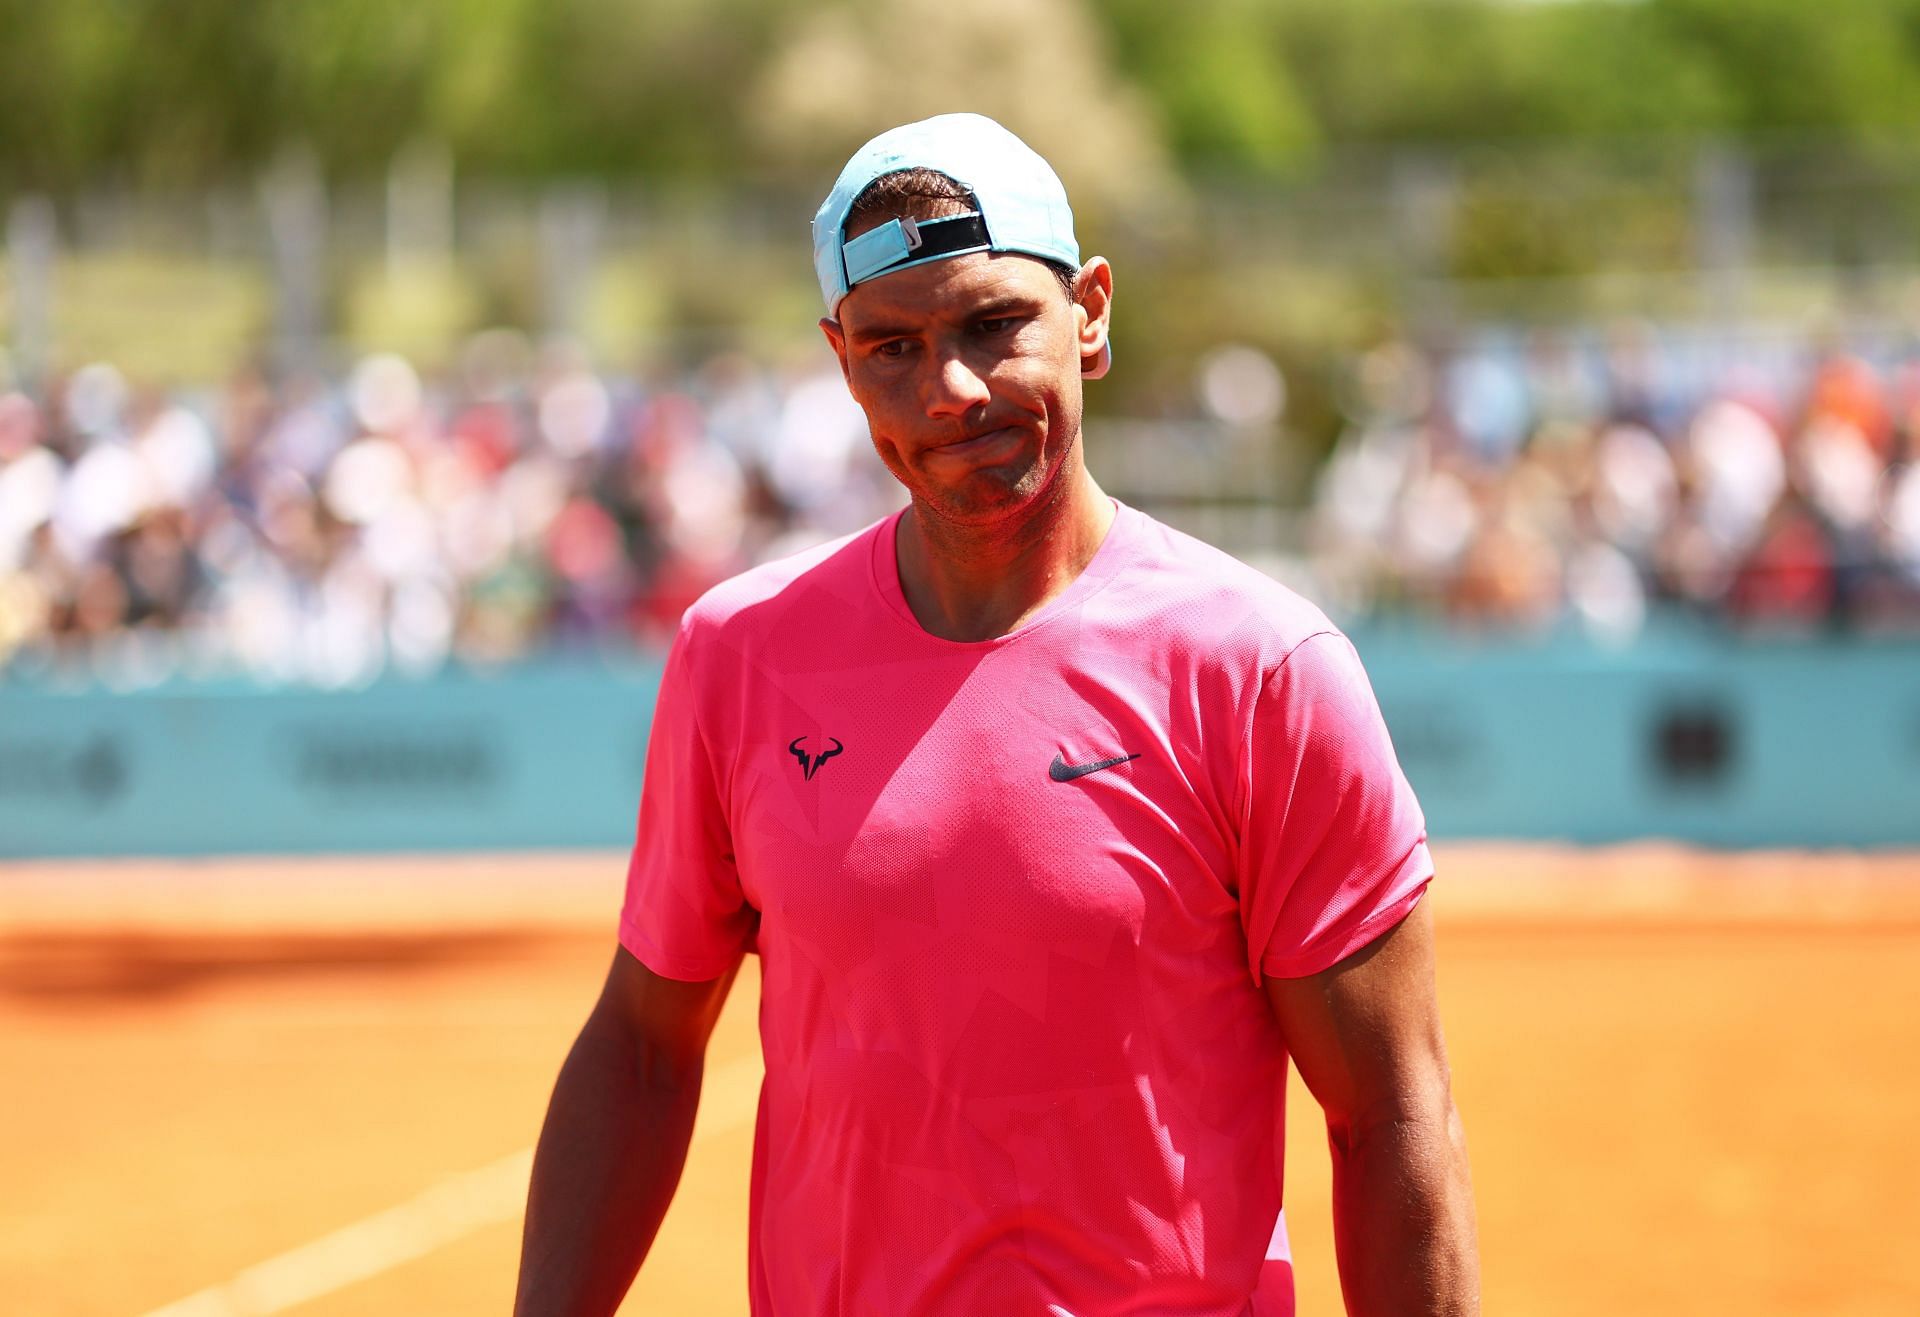 Rafael Nadal will look to do well at the Madrid Open